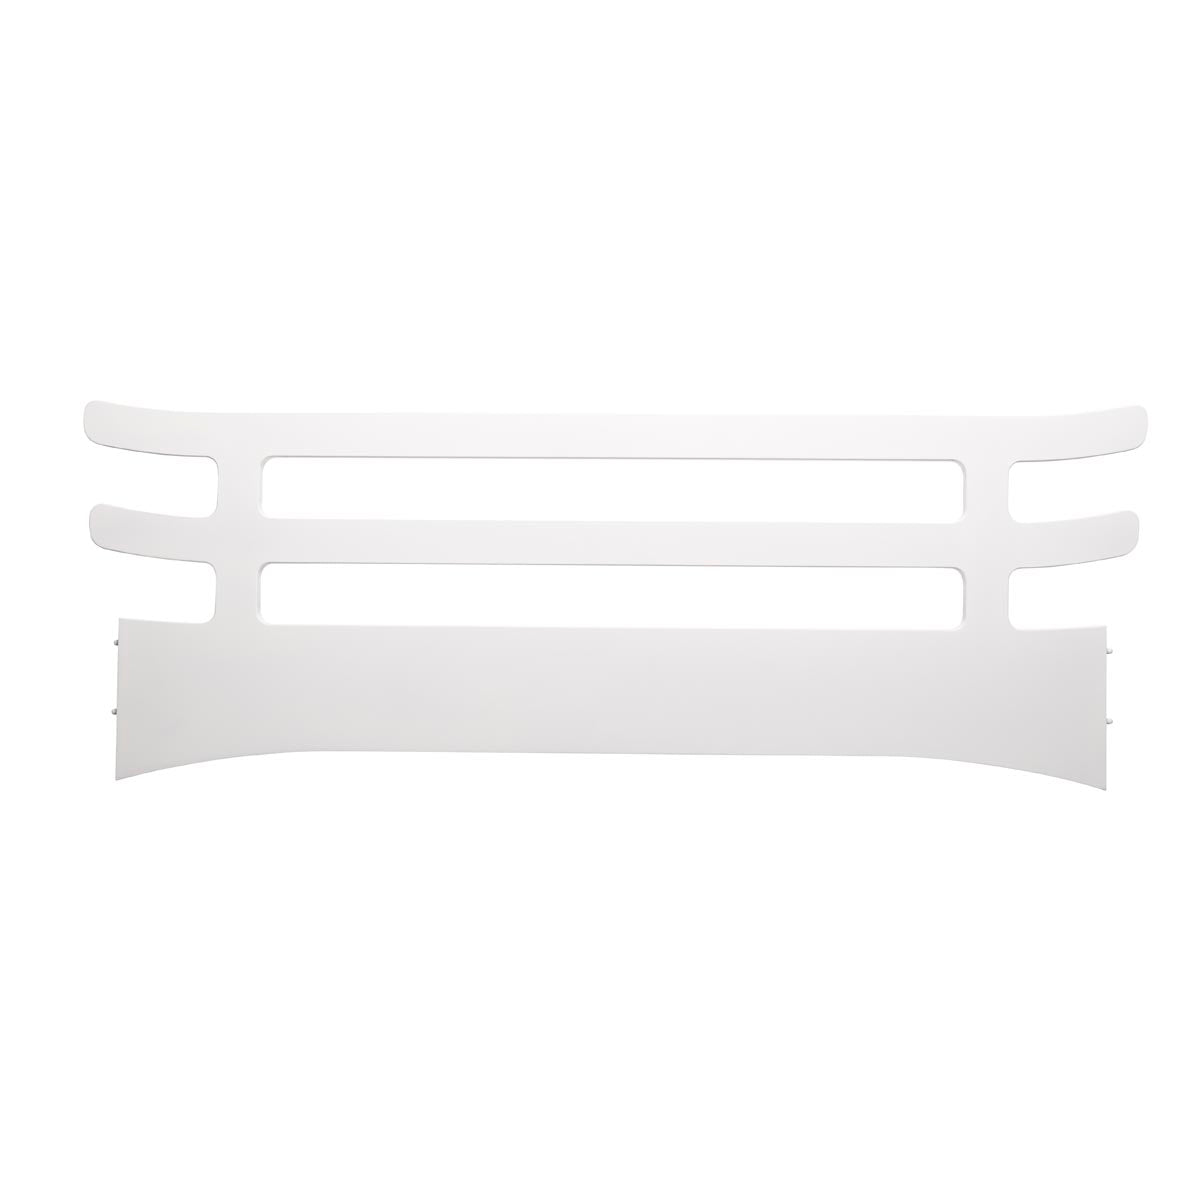 Leander Classic Junior Bed Safety Guard